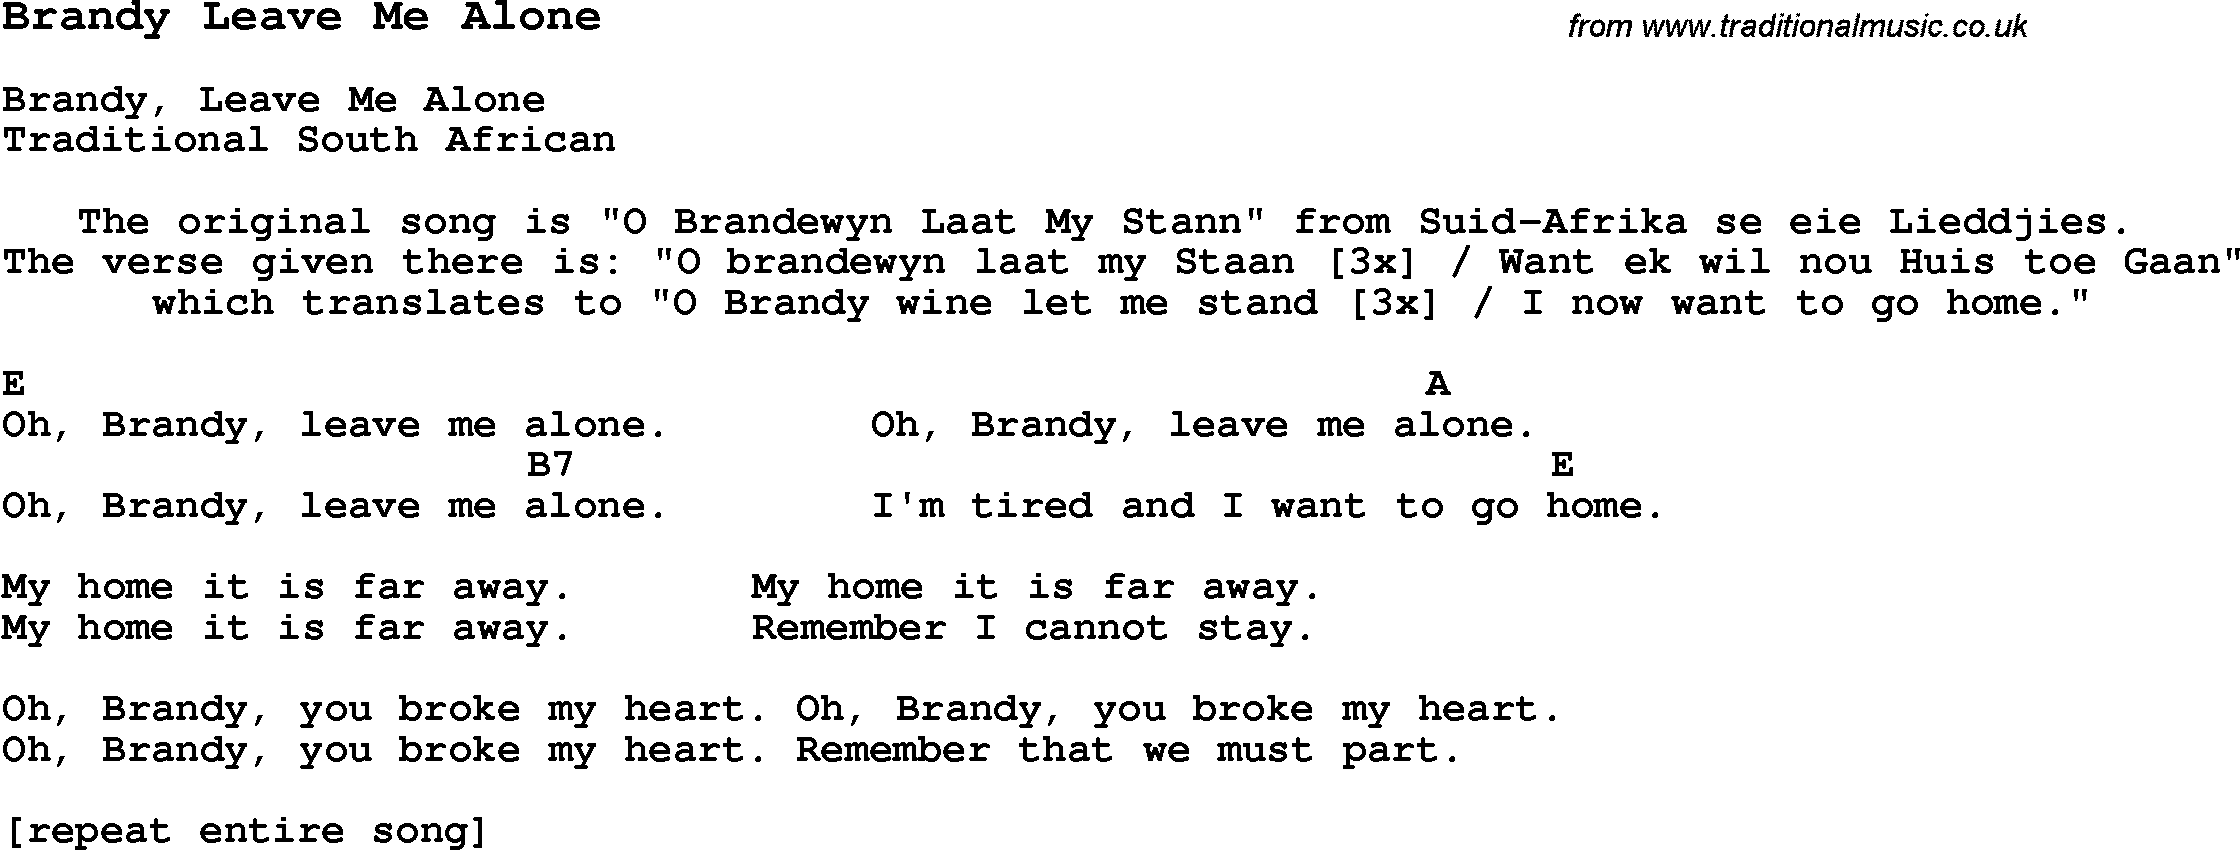 Traditional Song Brandy Leave Me Alone with Chords, Tabs and Lyrics